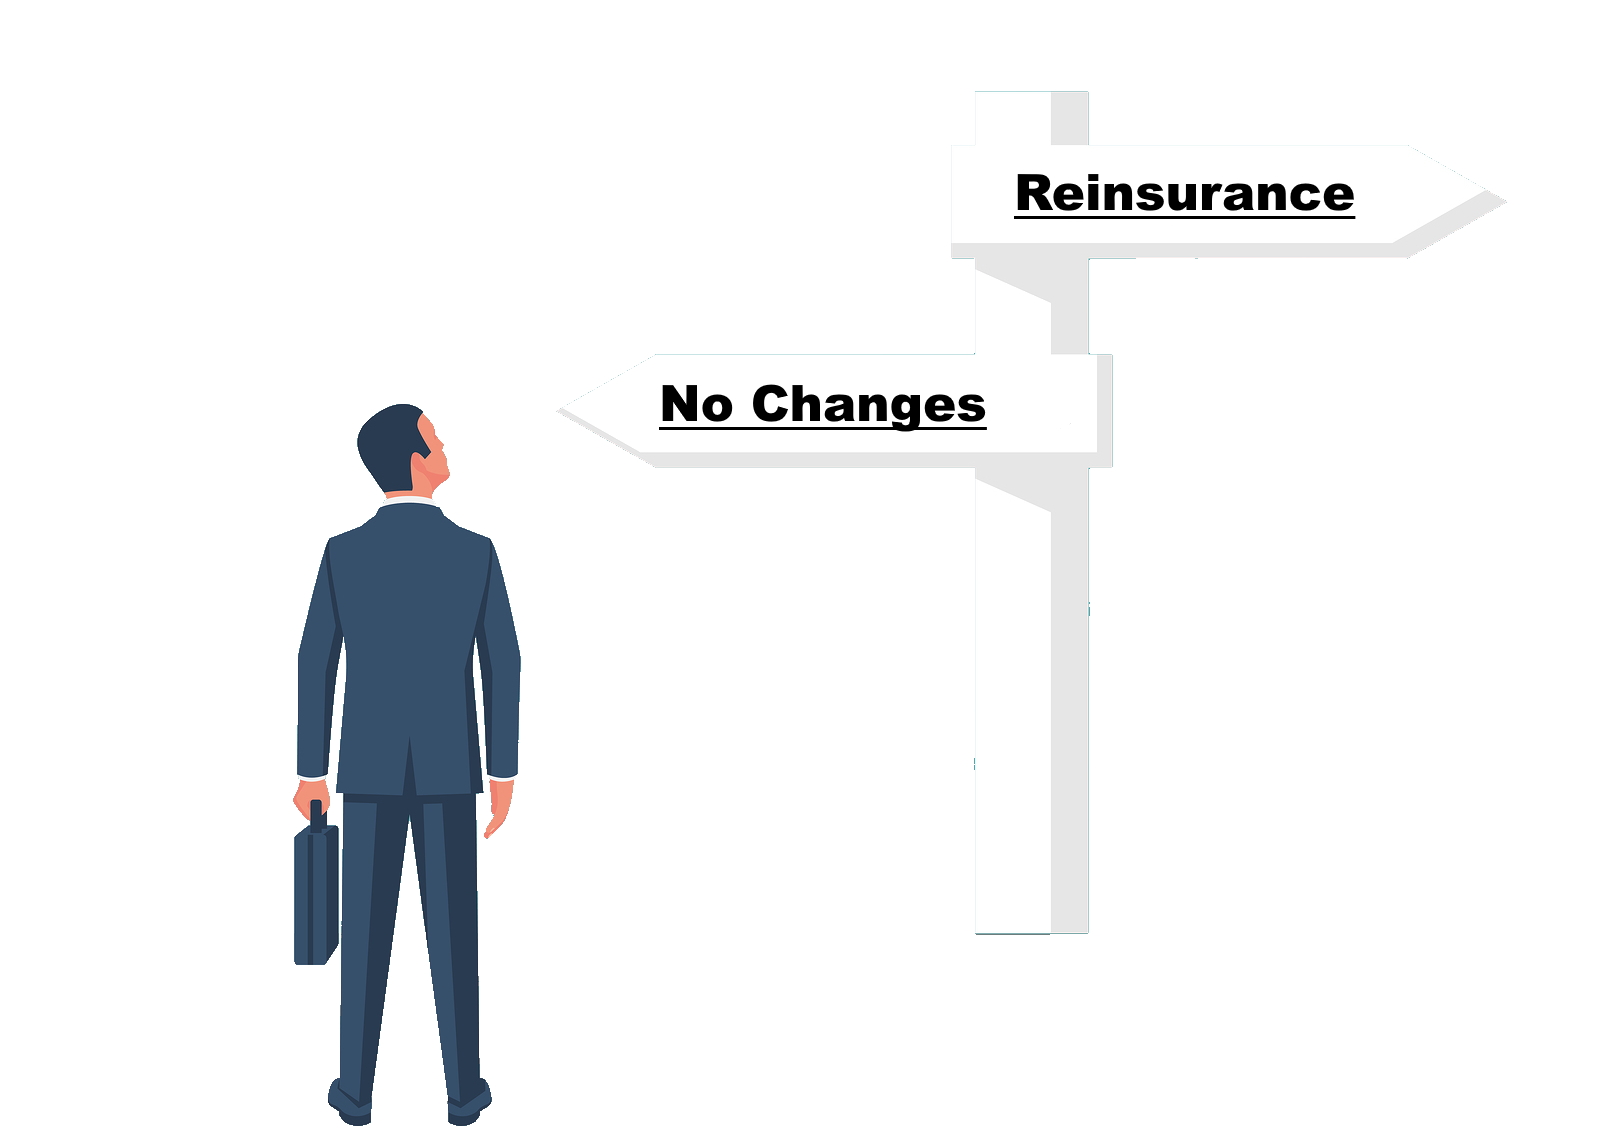 Reinsurance Company Formation & Administration